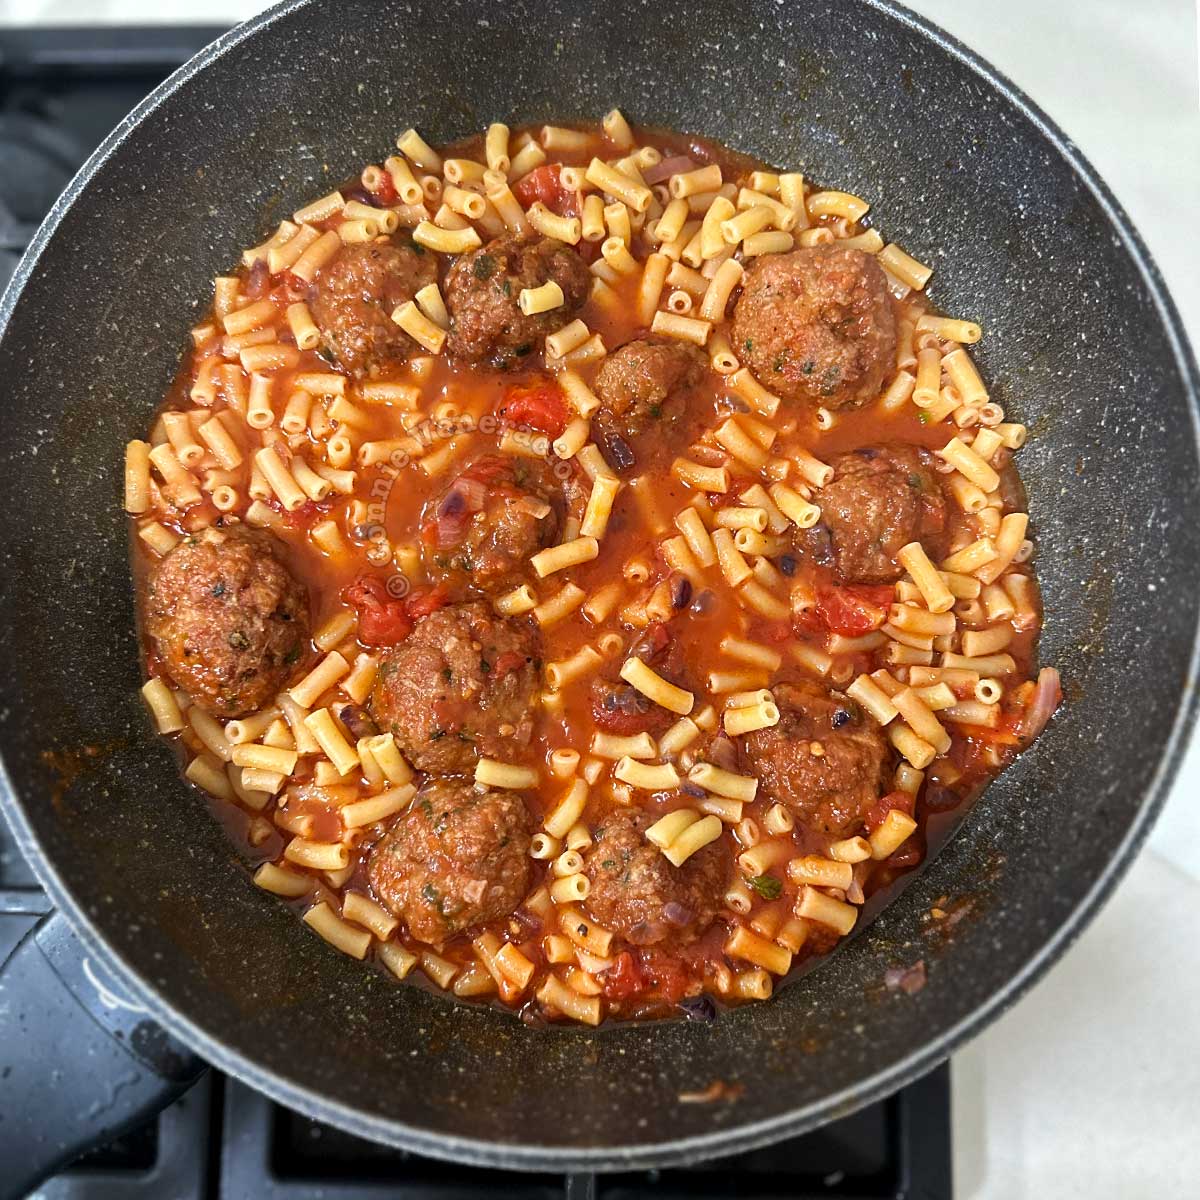 Macaroni and meatballs simmering in tomato sauce